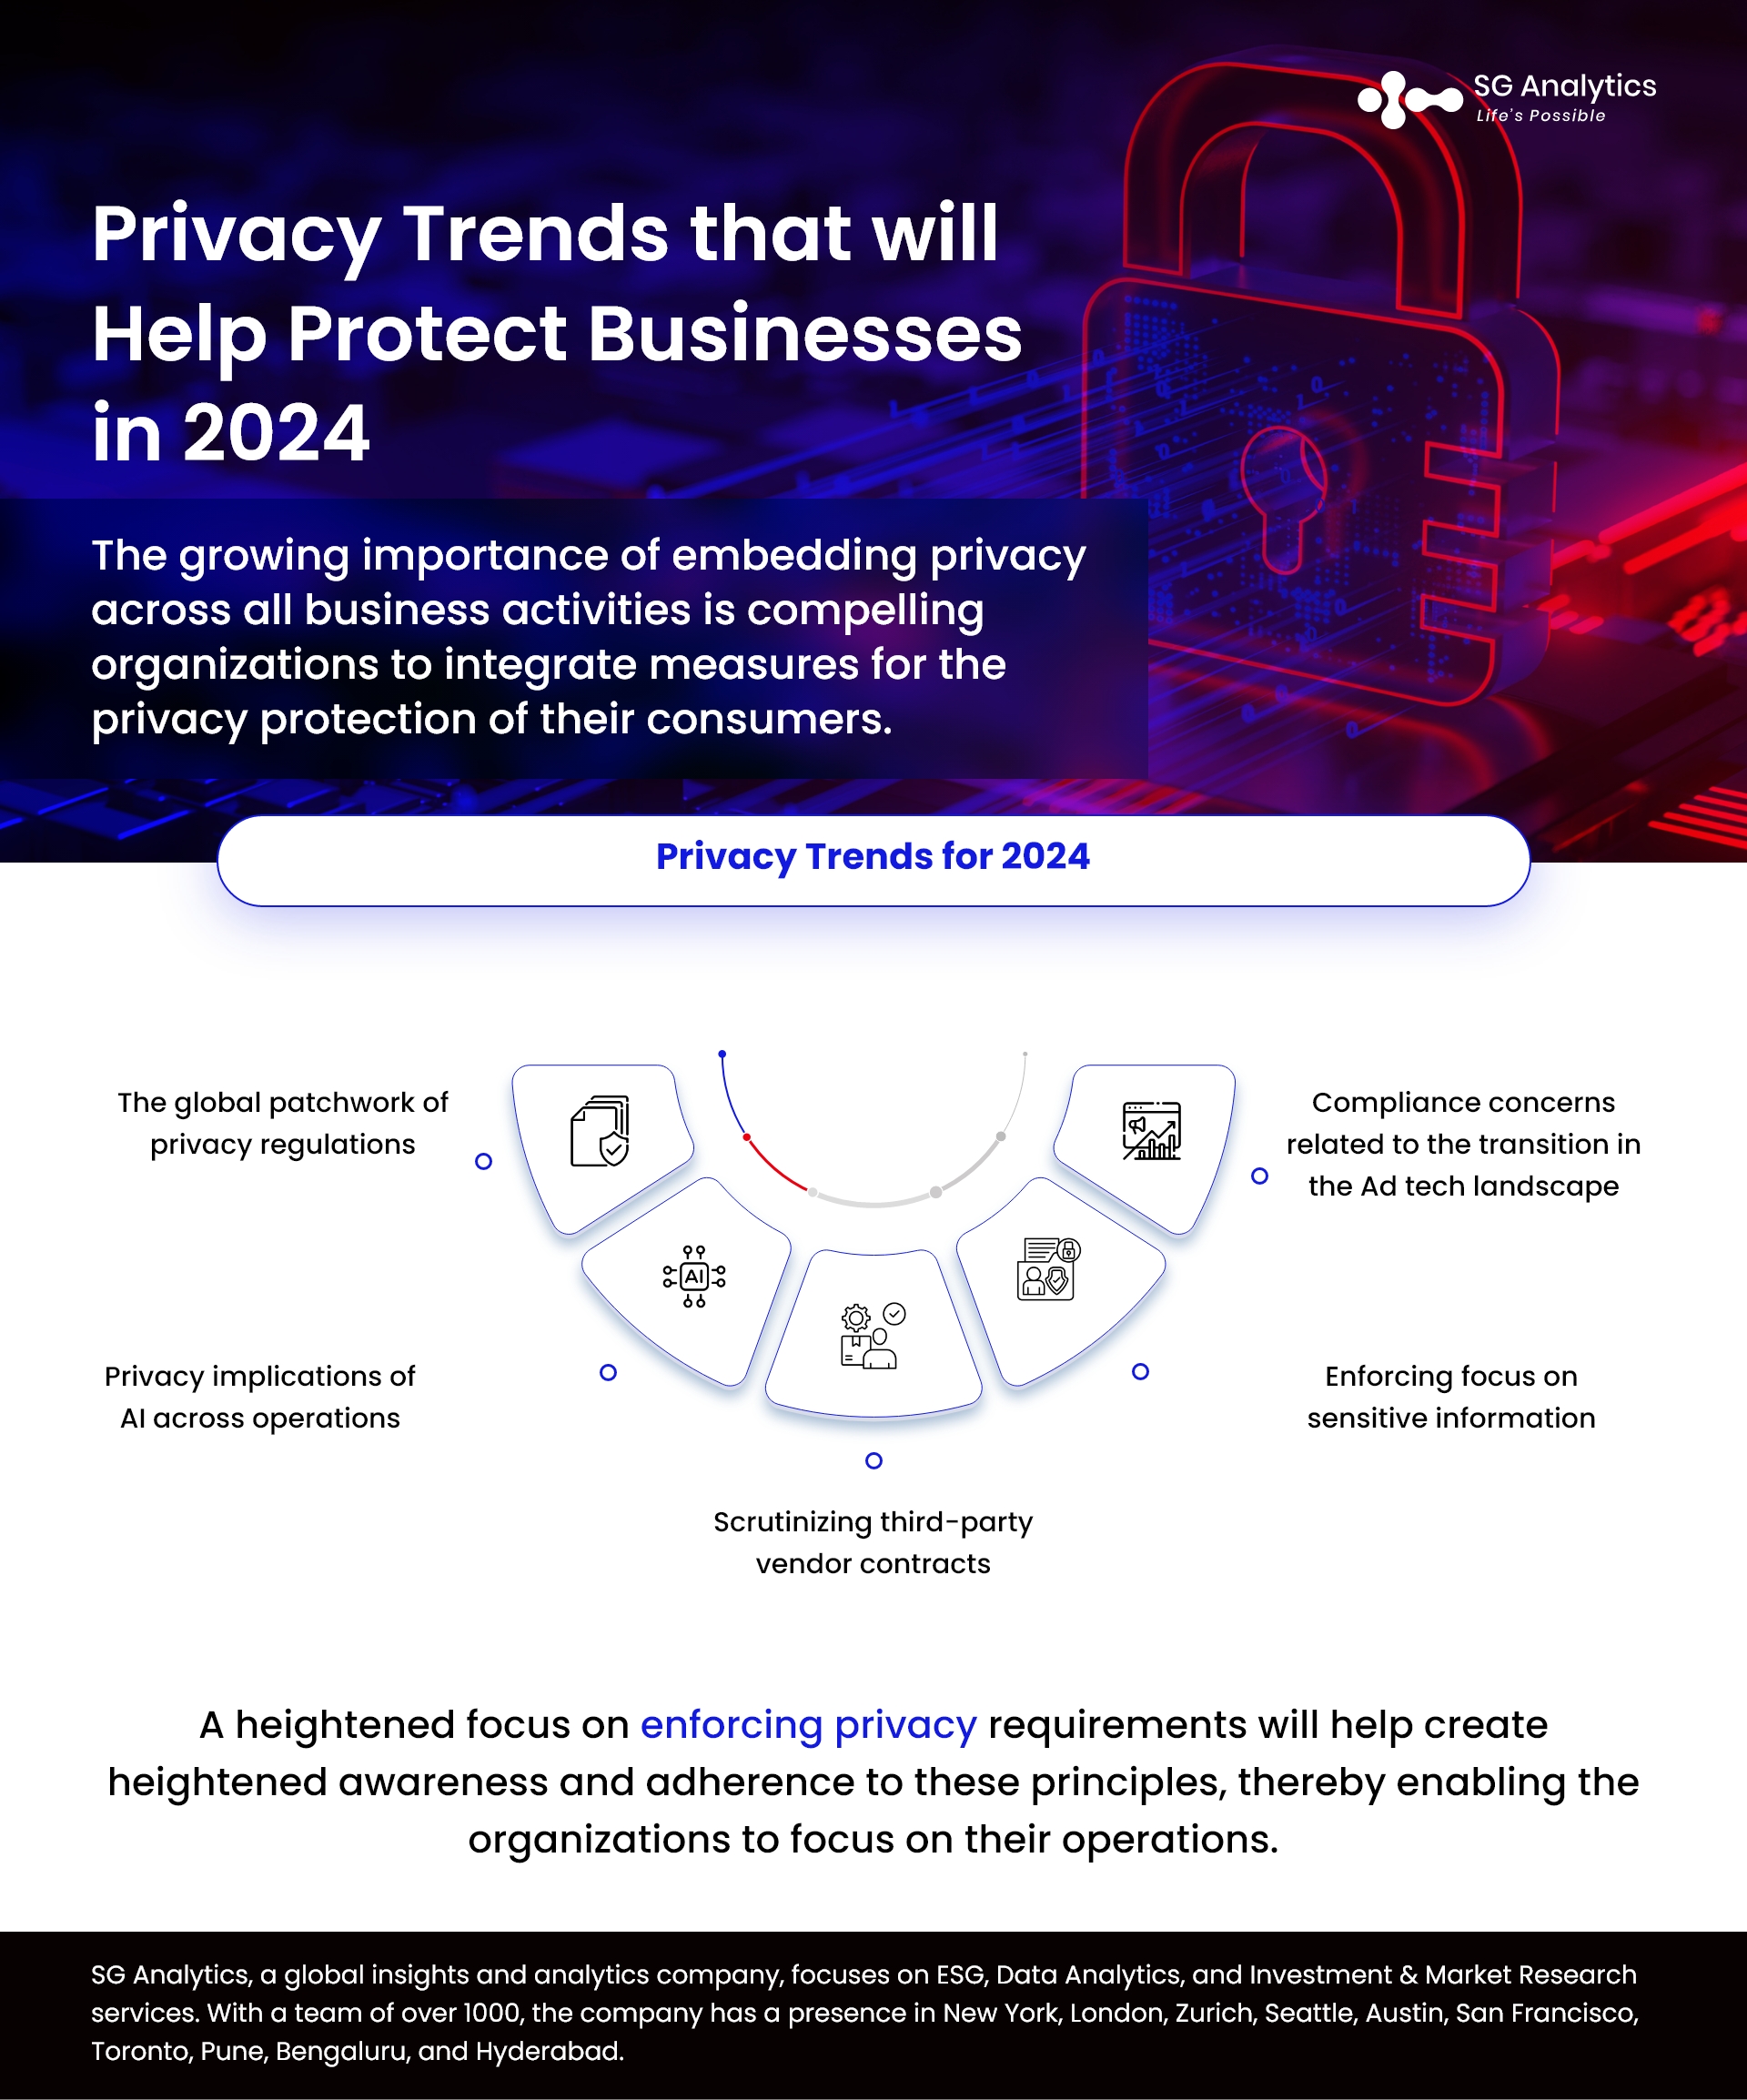 Privacy Trends that will Help Protect Businesses in 2024